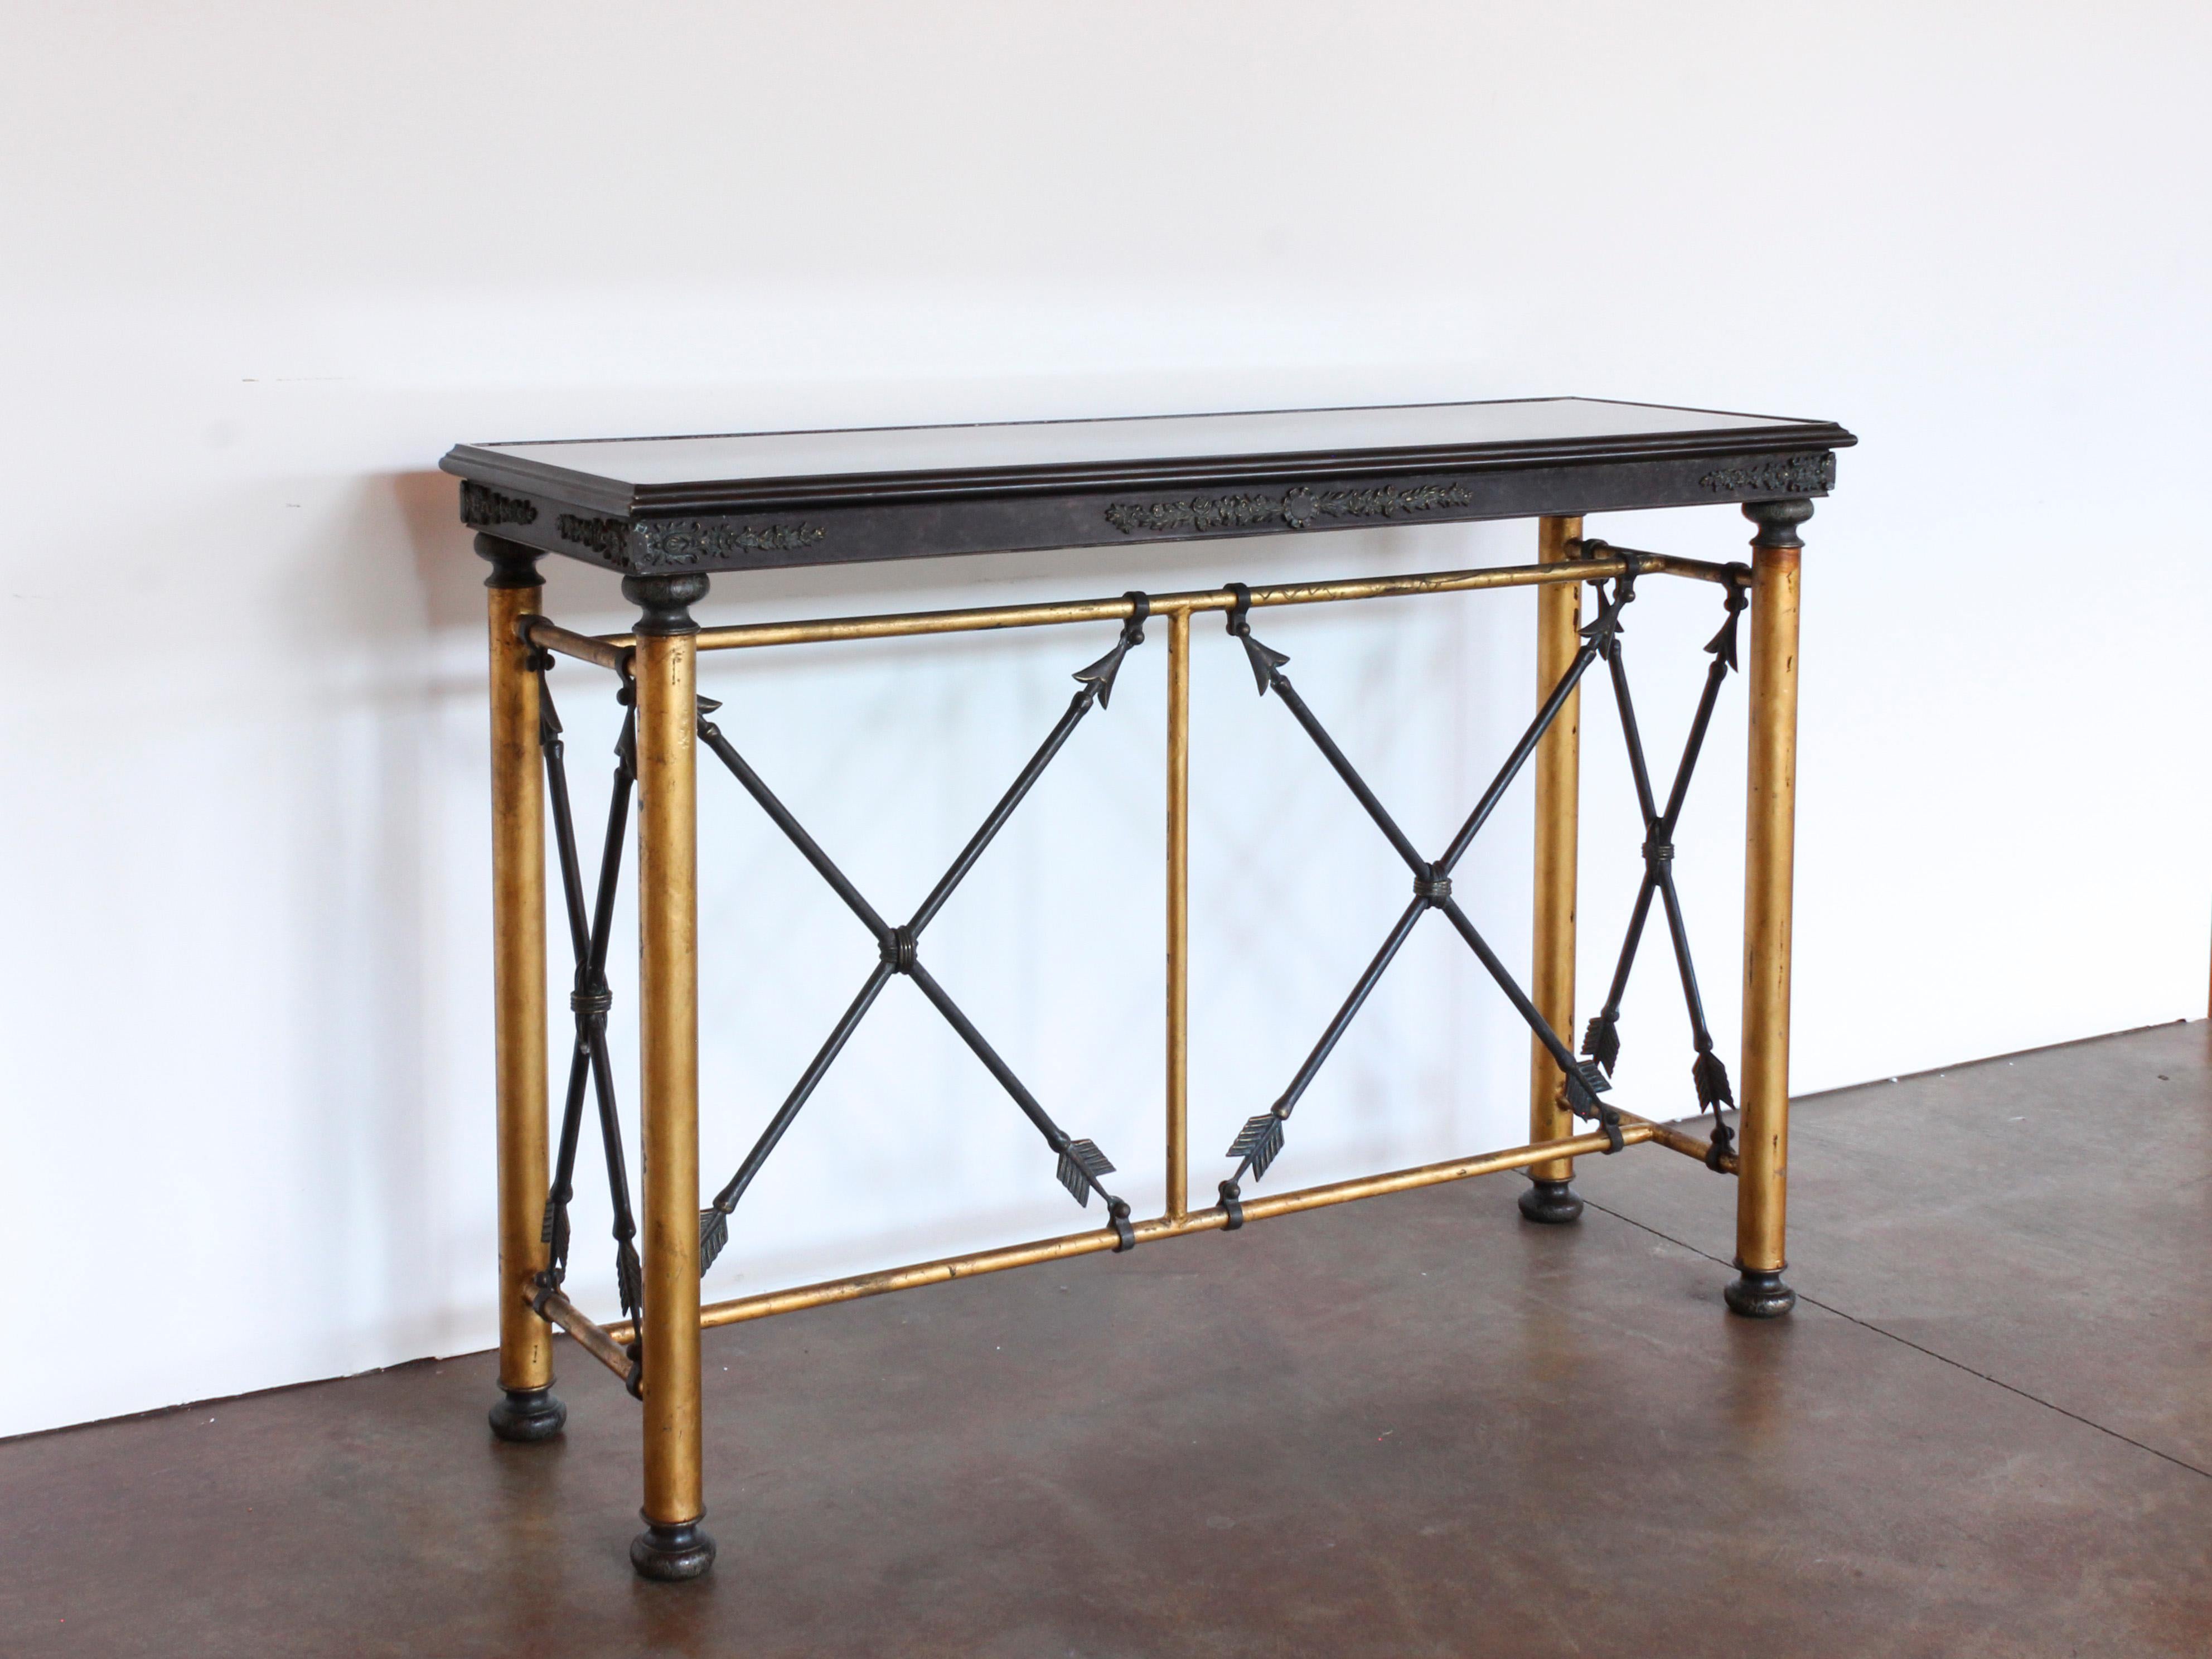 Early 20th century metal and brass elongated rectangular console table with a brown and black fabricated stone top. The stretcher is formed from wrought iron arrows, brass foliate and floral centered motif. 

 